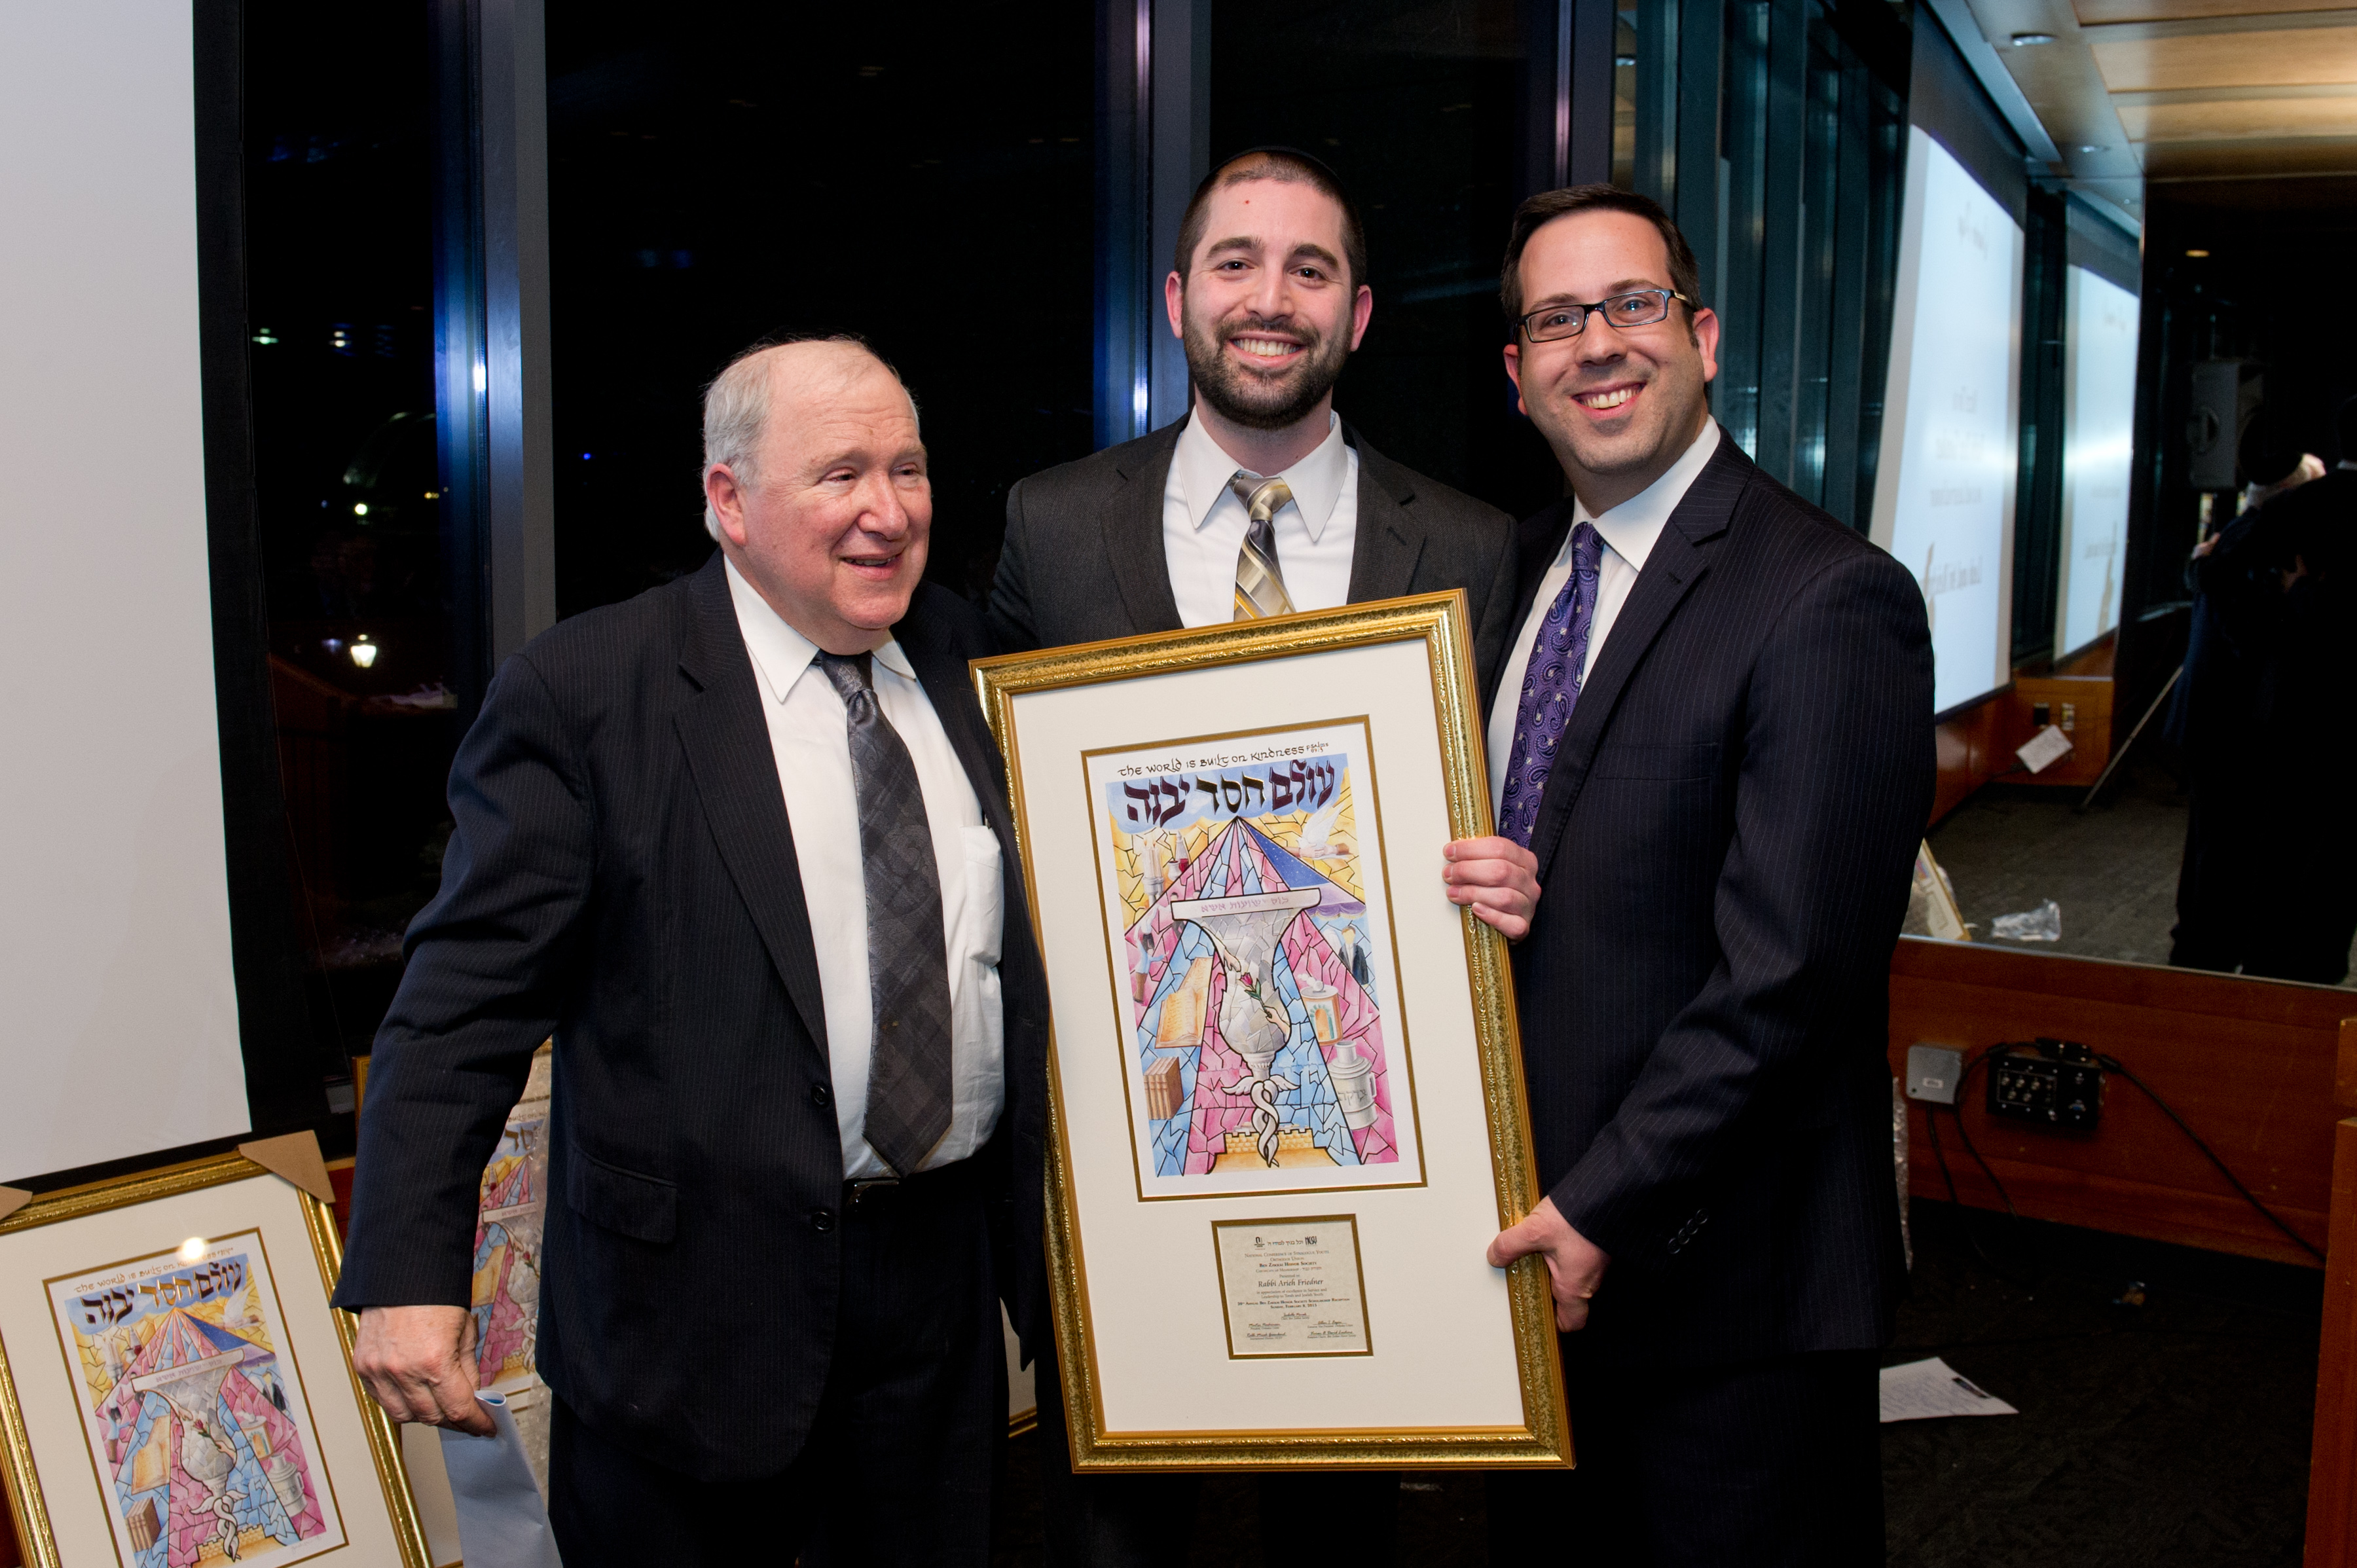 Rabbi Arieh Friedner of Cleveland NCSY was one of the night's inductees into the Ben Zakkai Honor Society. From left to right: Dinner Chair Dr. David Luchins, Rabbi Arieh Friedner, and Rabbi Micah Greenland, NCSY's International Director. 